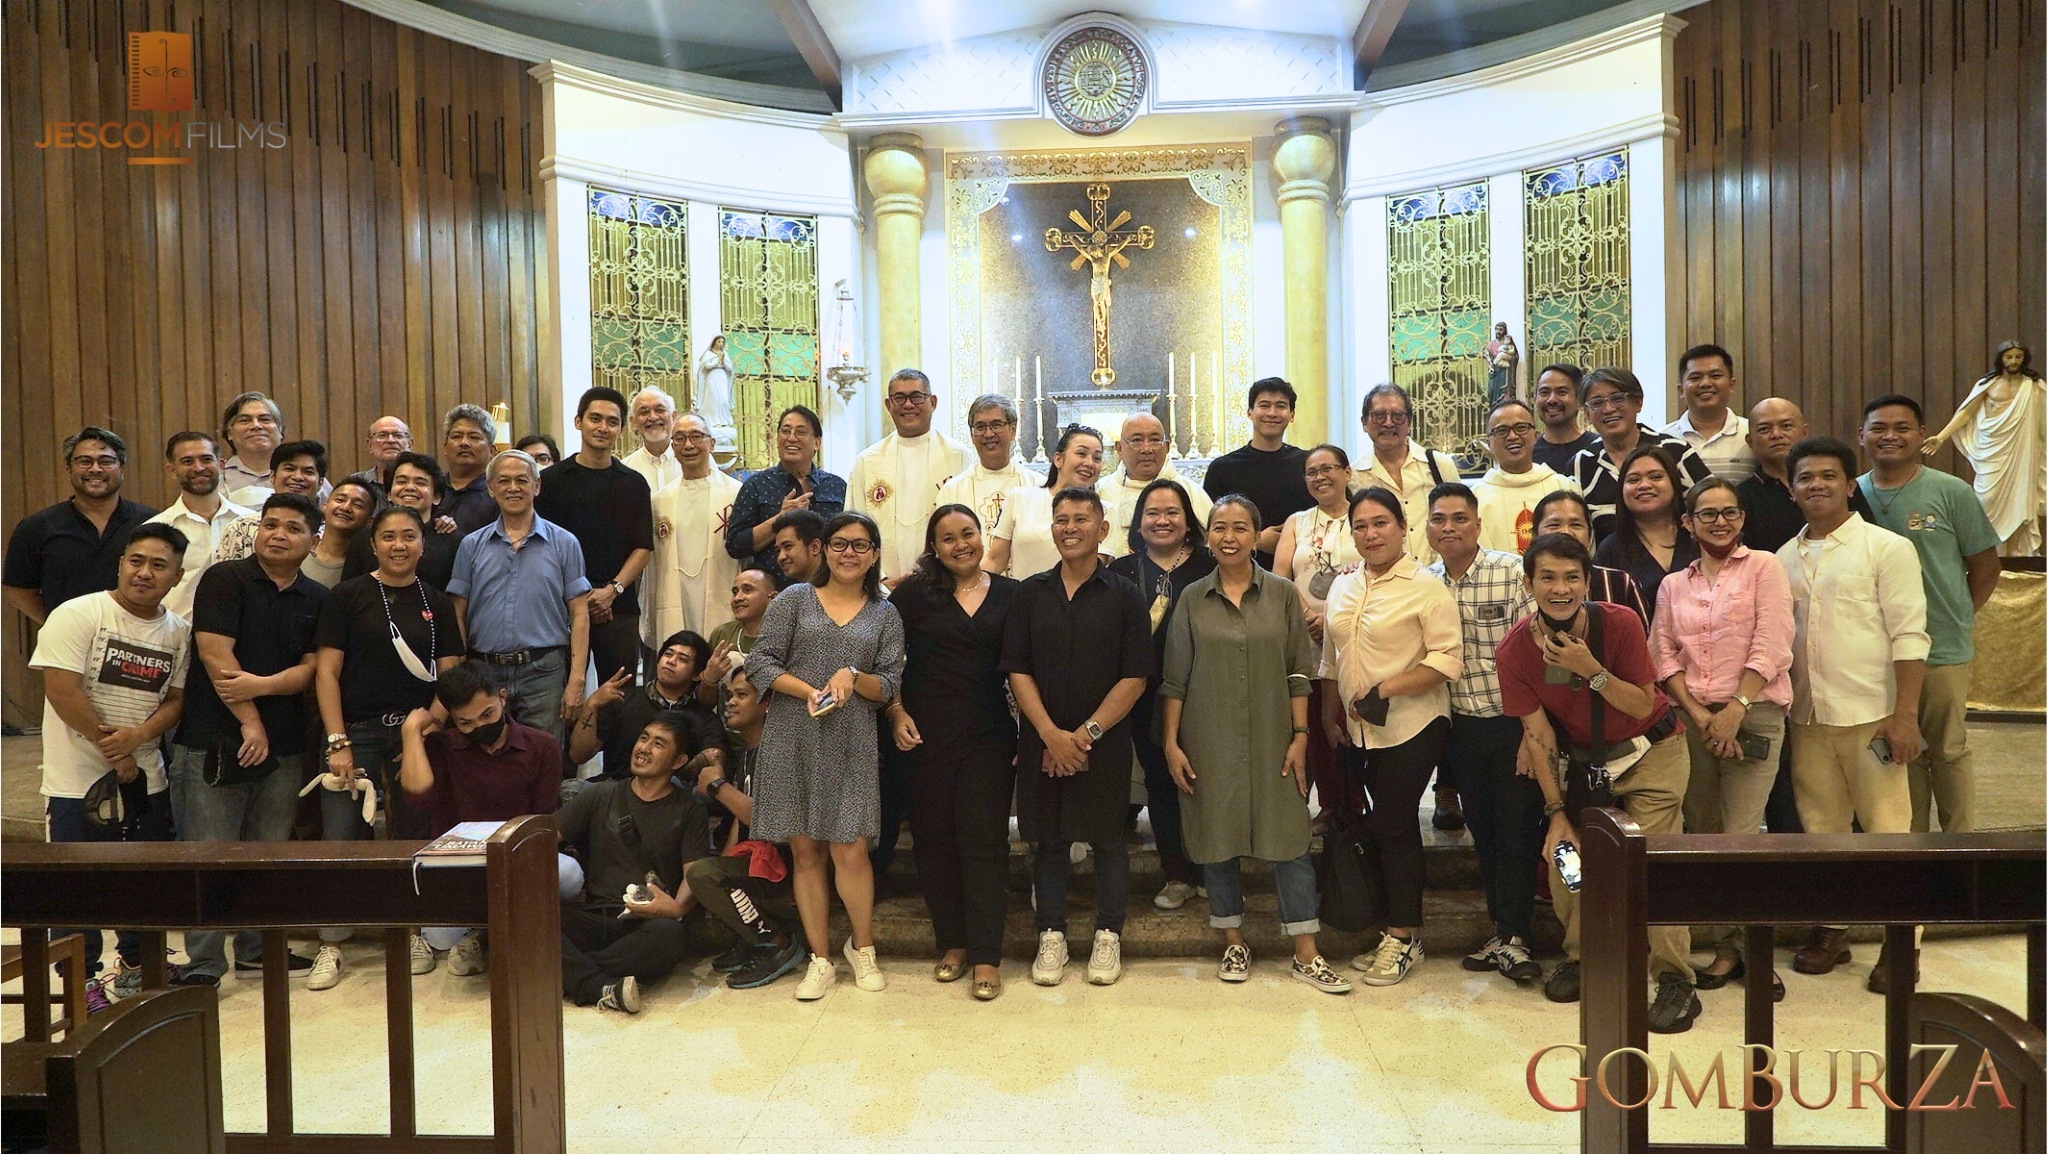 GomBurZa cast and crew celebrate with Thanksgiving Mass and Dinner